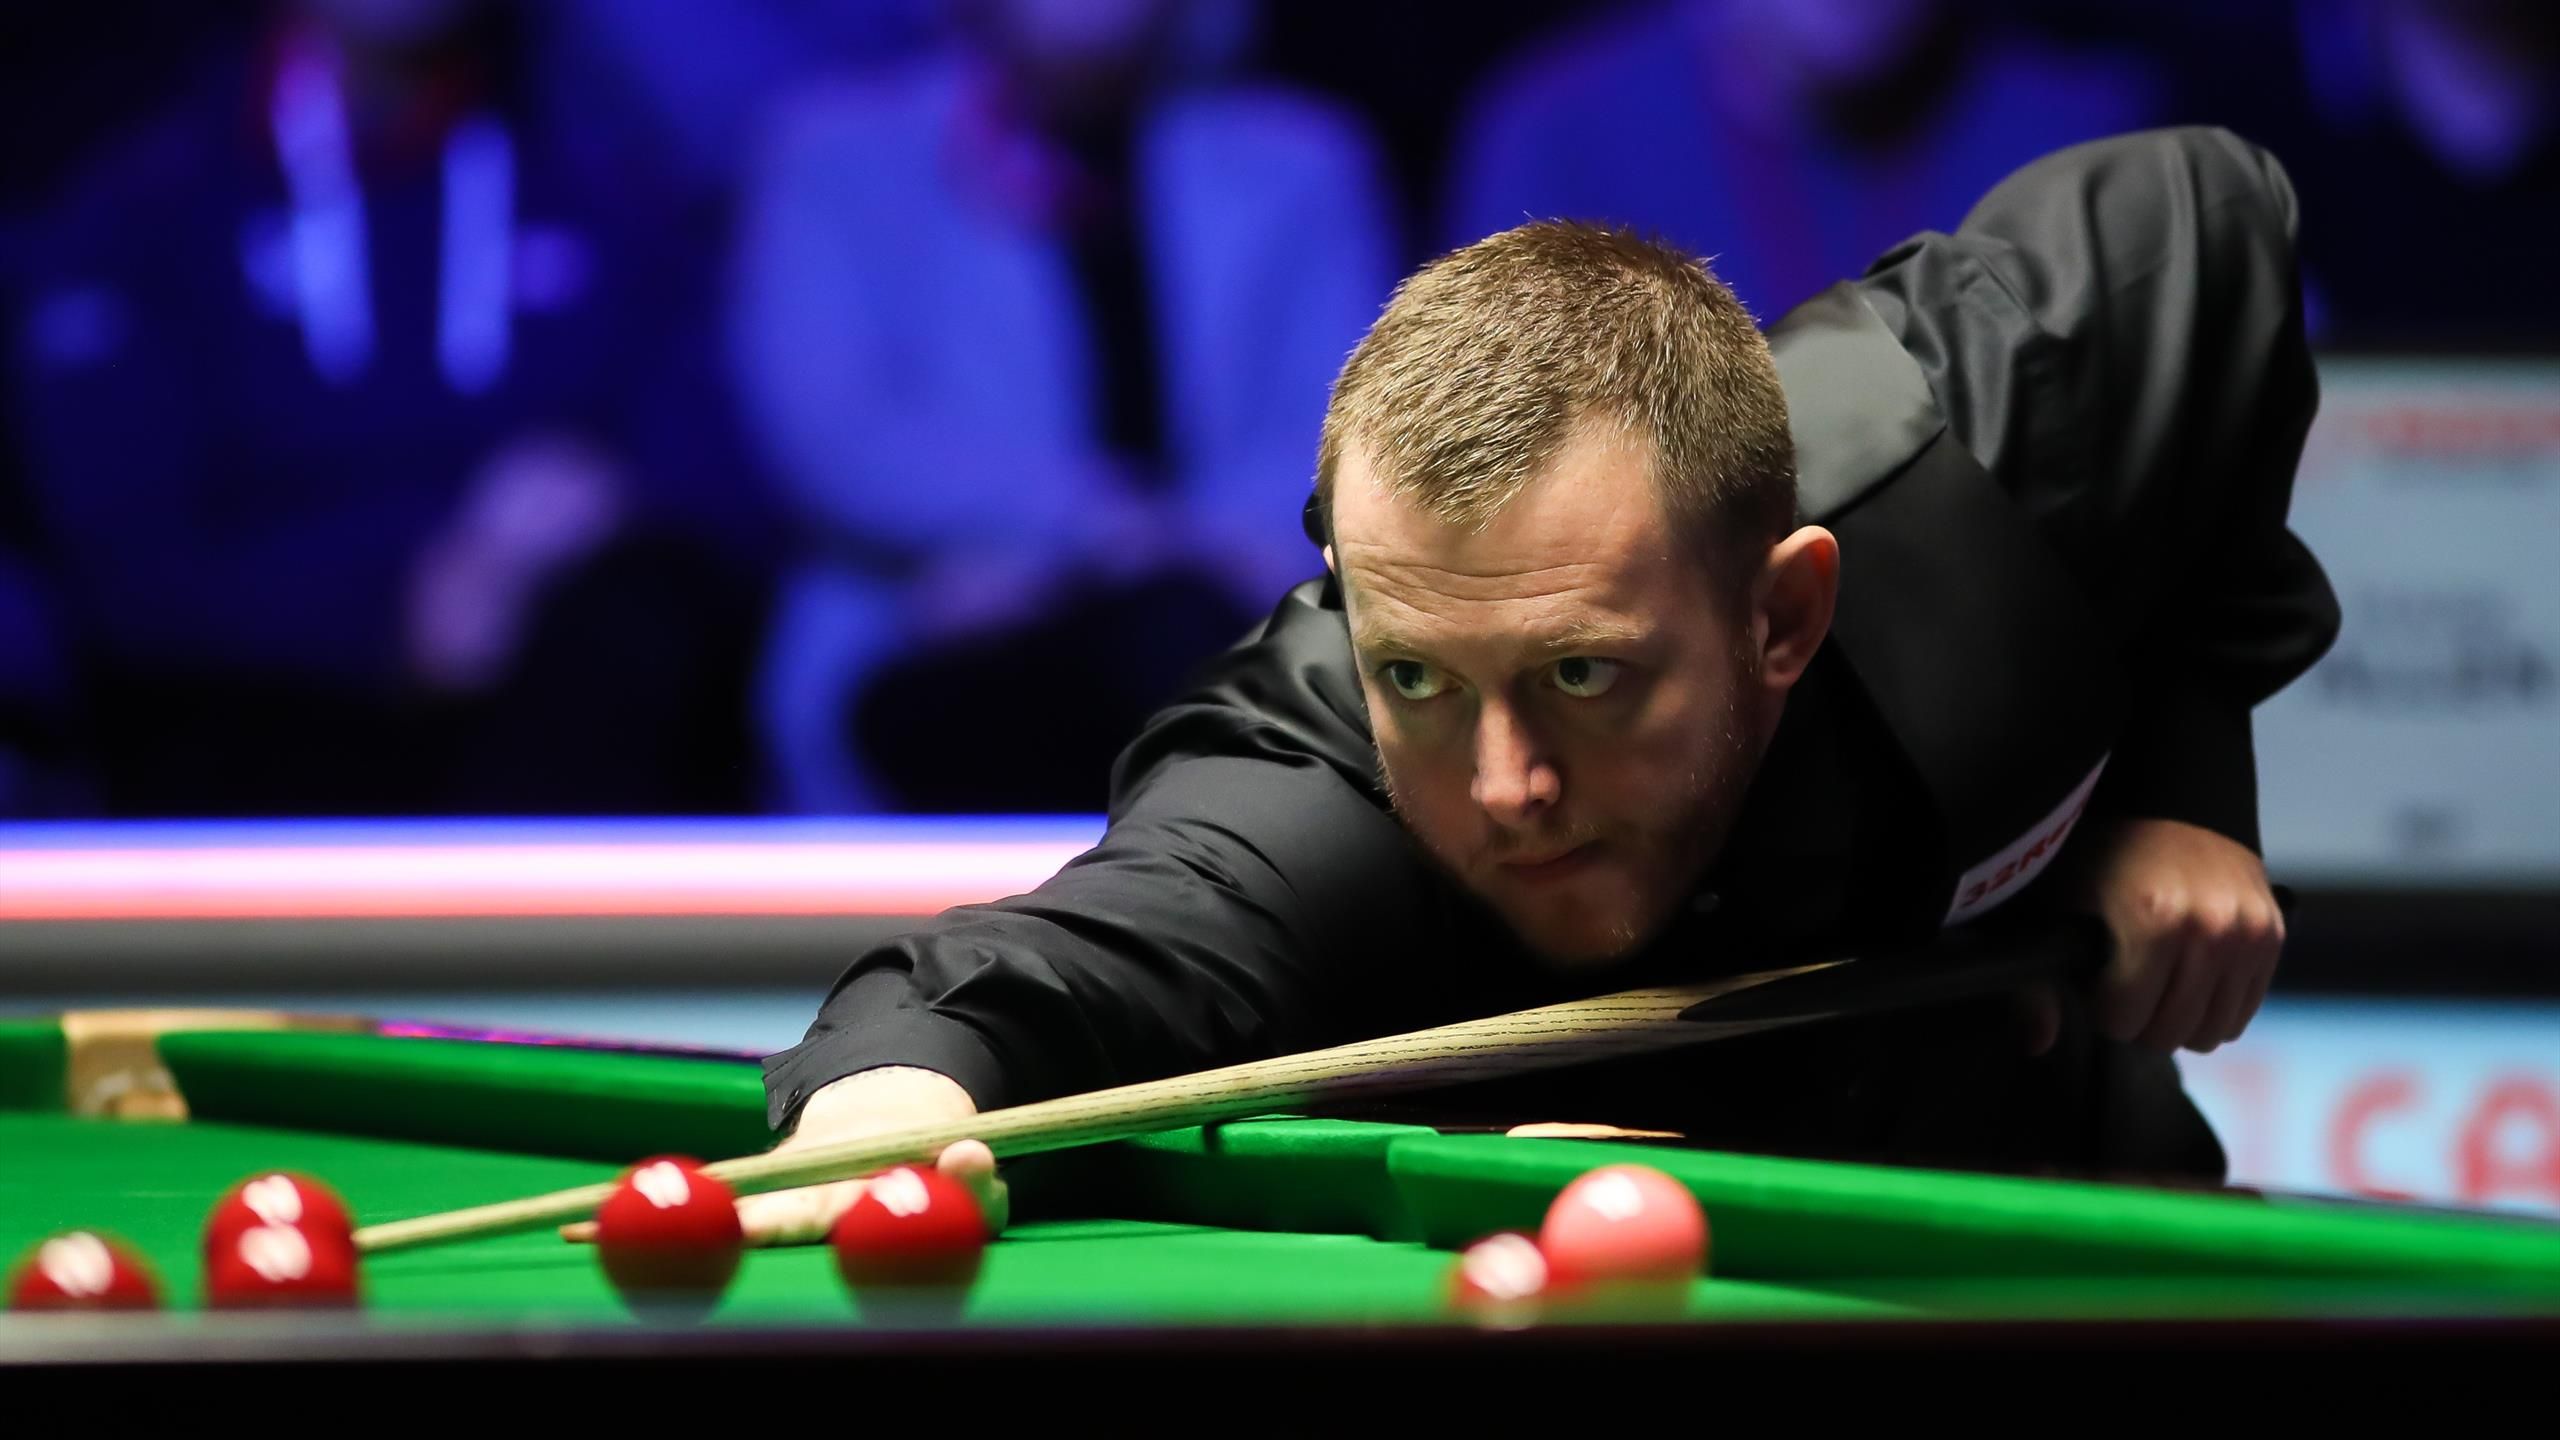 British Open snooker final as it happened - Ryan Day beats Mark Allen to claim 2022 British Open title